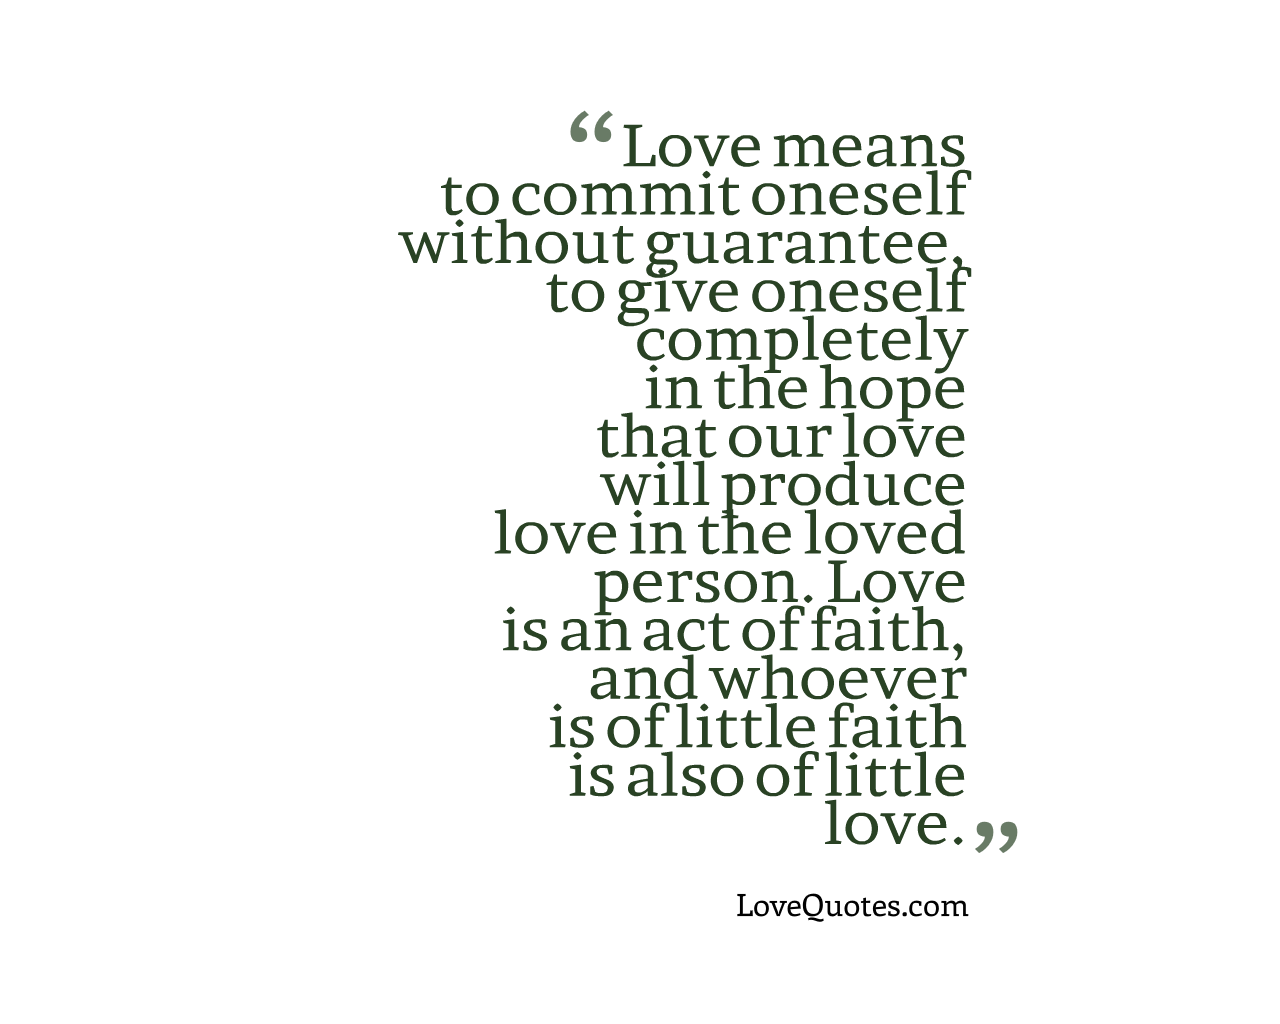 Love Means To Commit